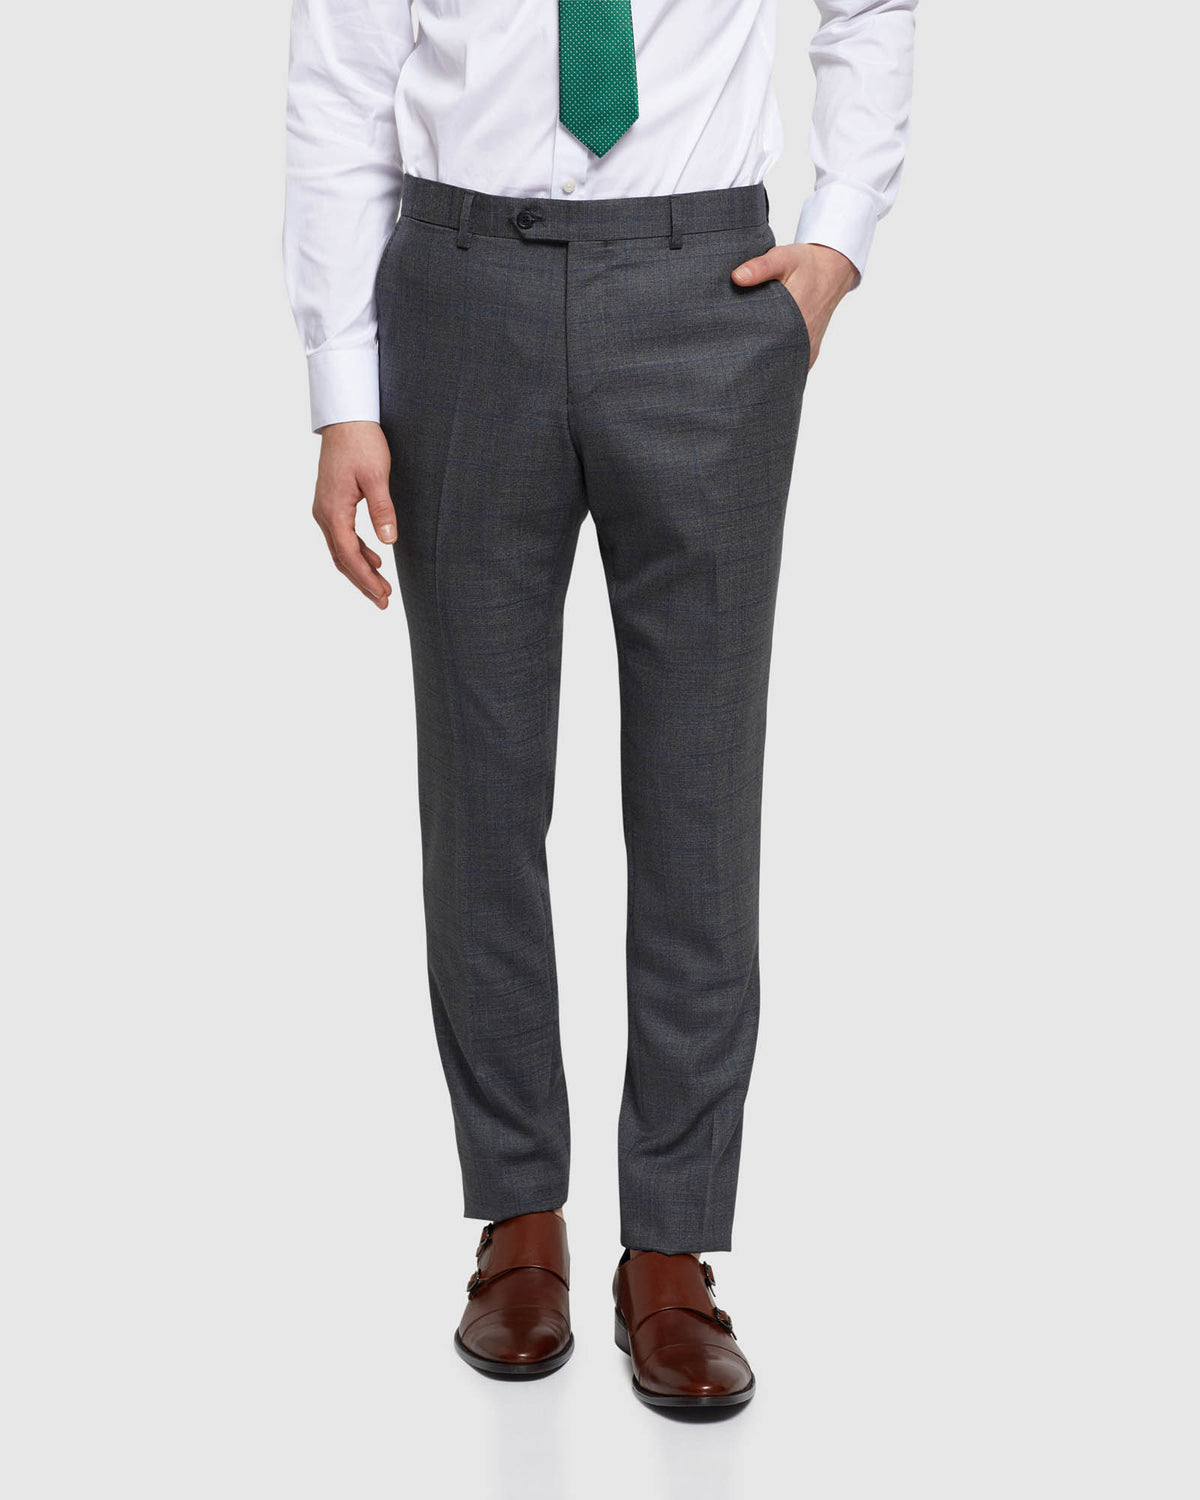 AUDEN WOOL CHECKED SUIT TROUSERS